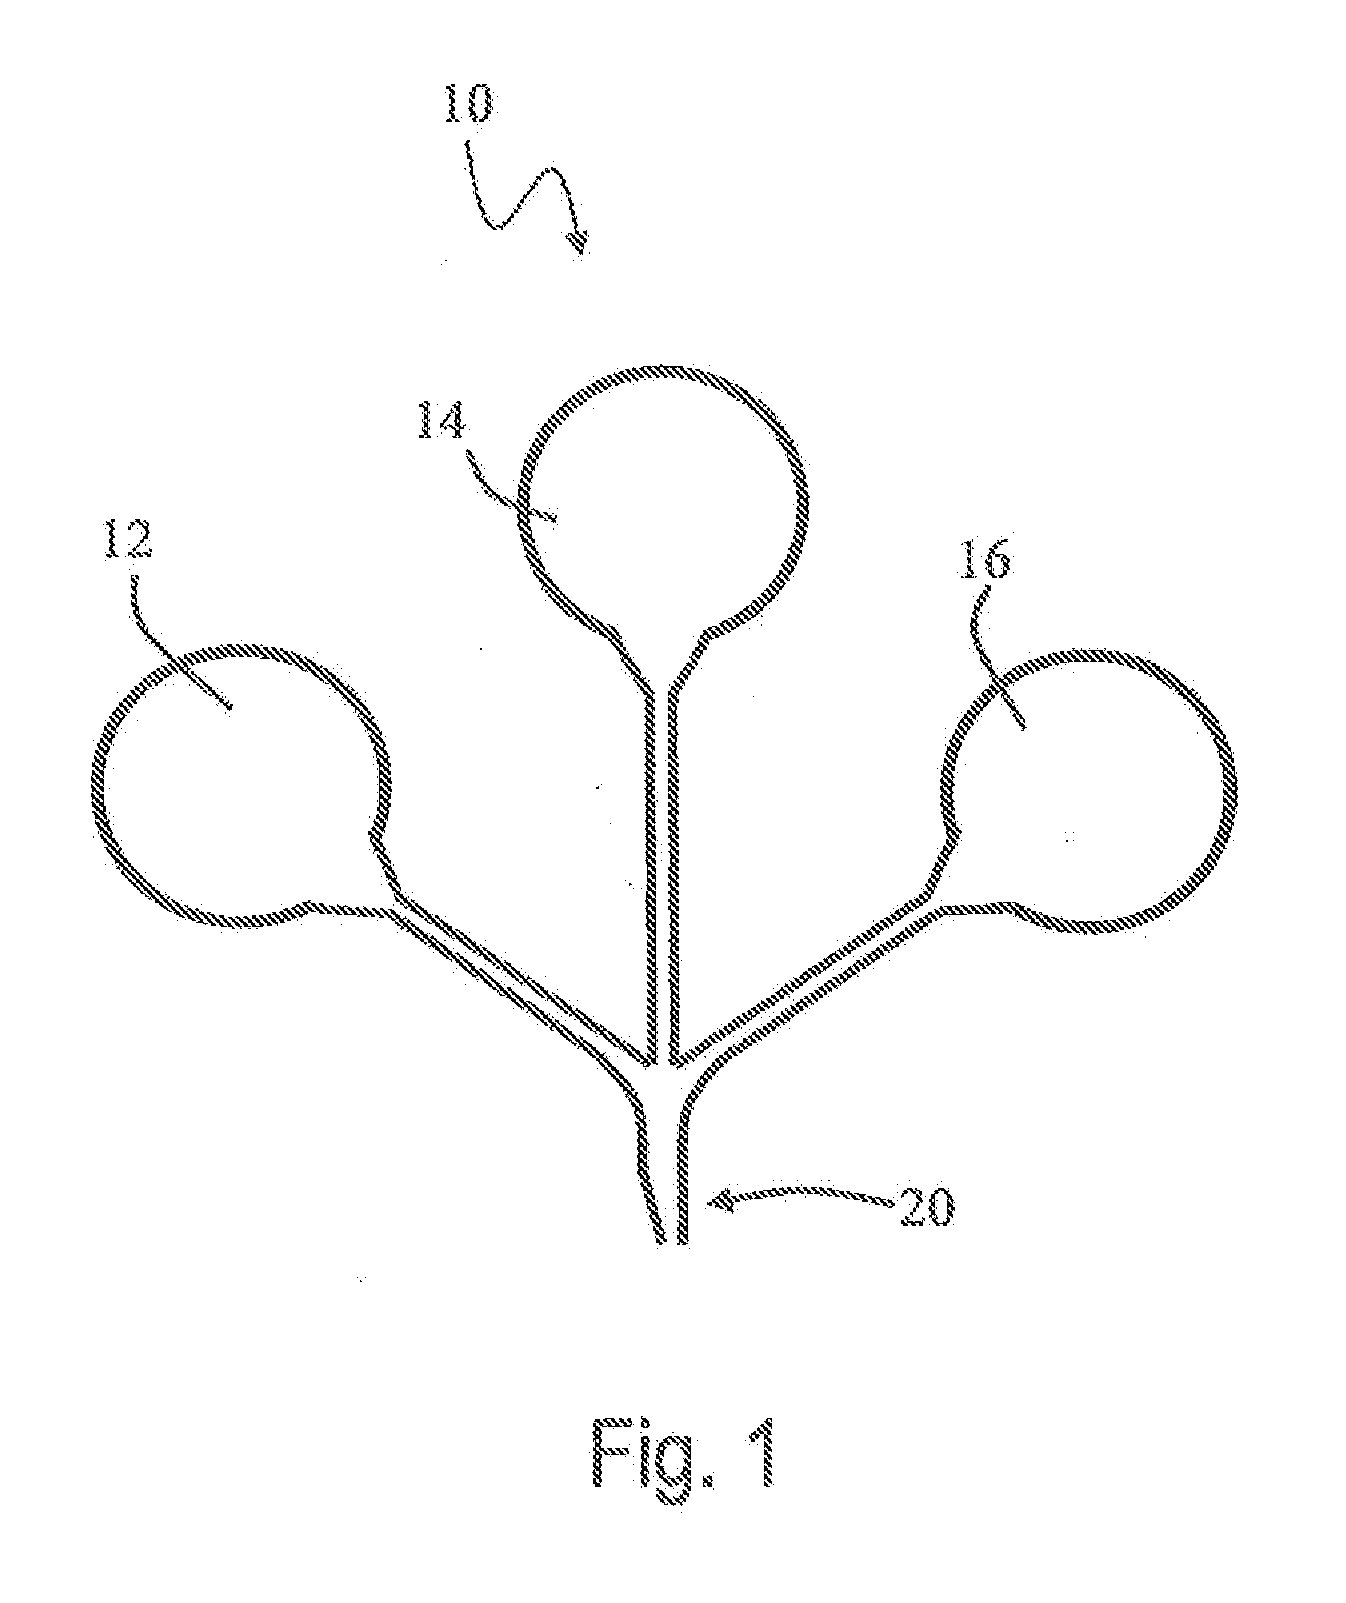 Multiple Layer Polymer Interlayers Having a Melt-Fractured Surface